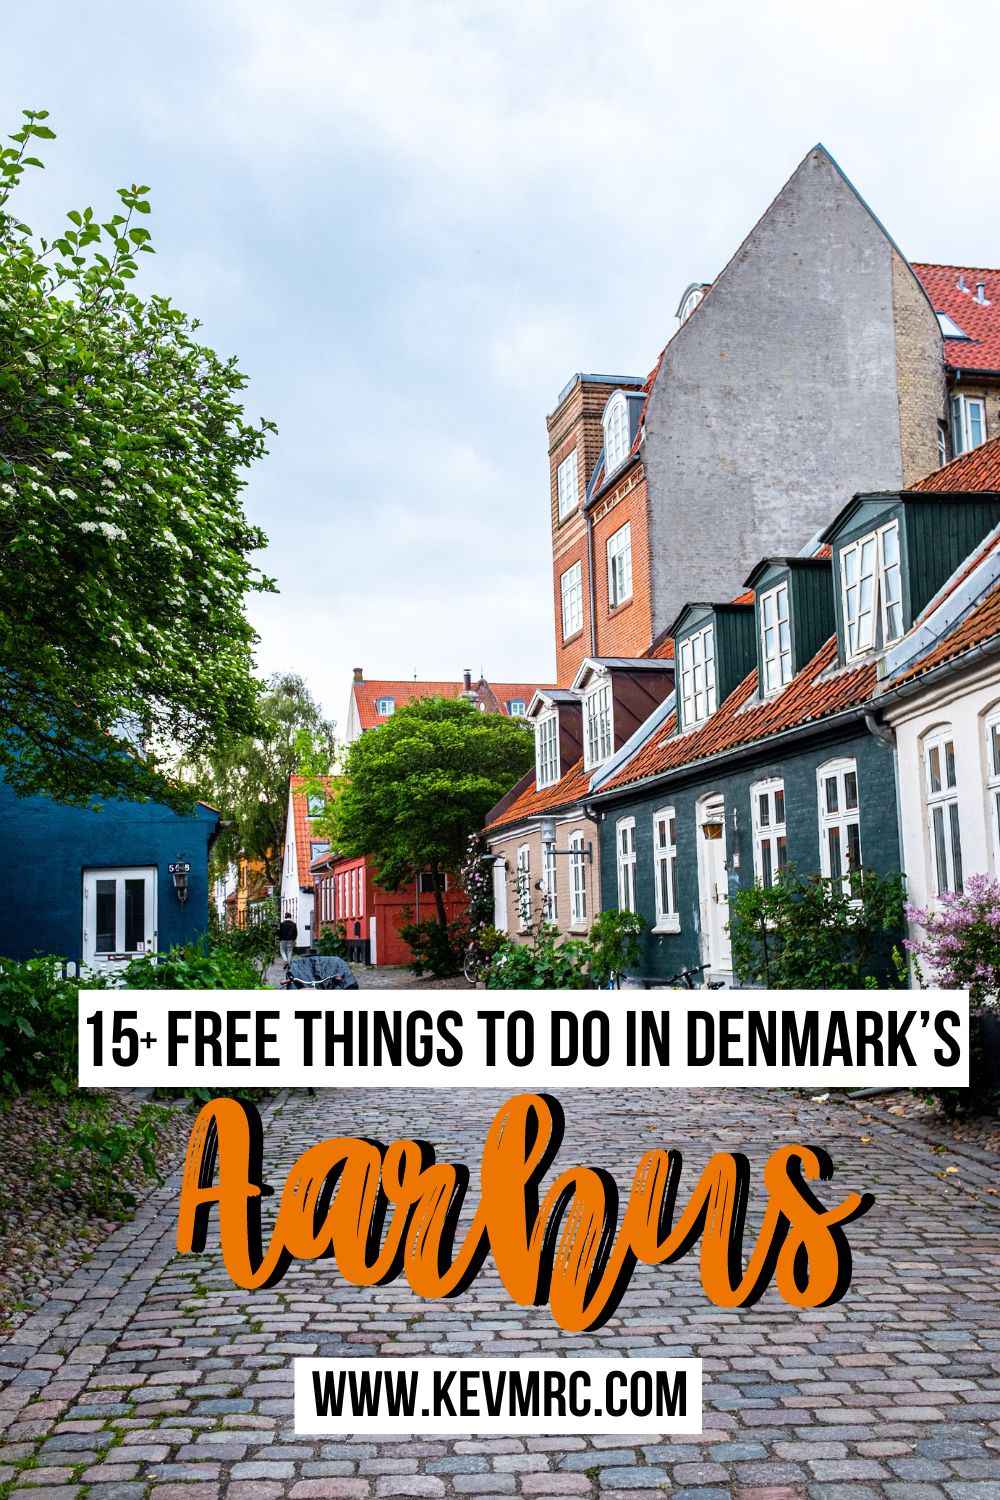 Wondering what to do in Aarhus for free? Discover here 15+ best free things to do in Aarhus you can't miss if you're on a budget. aarhus denmark travel | aarhus attractions | aarhus budget guide #aarhus #denmarktravel